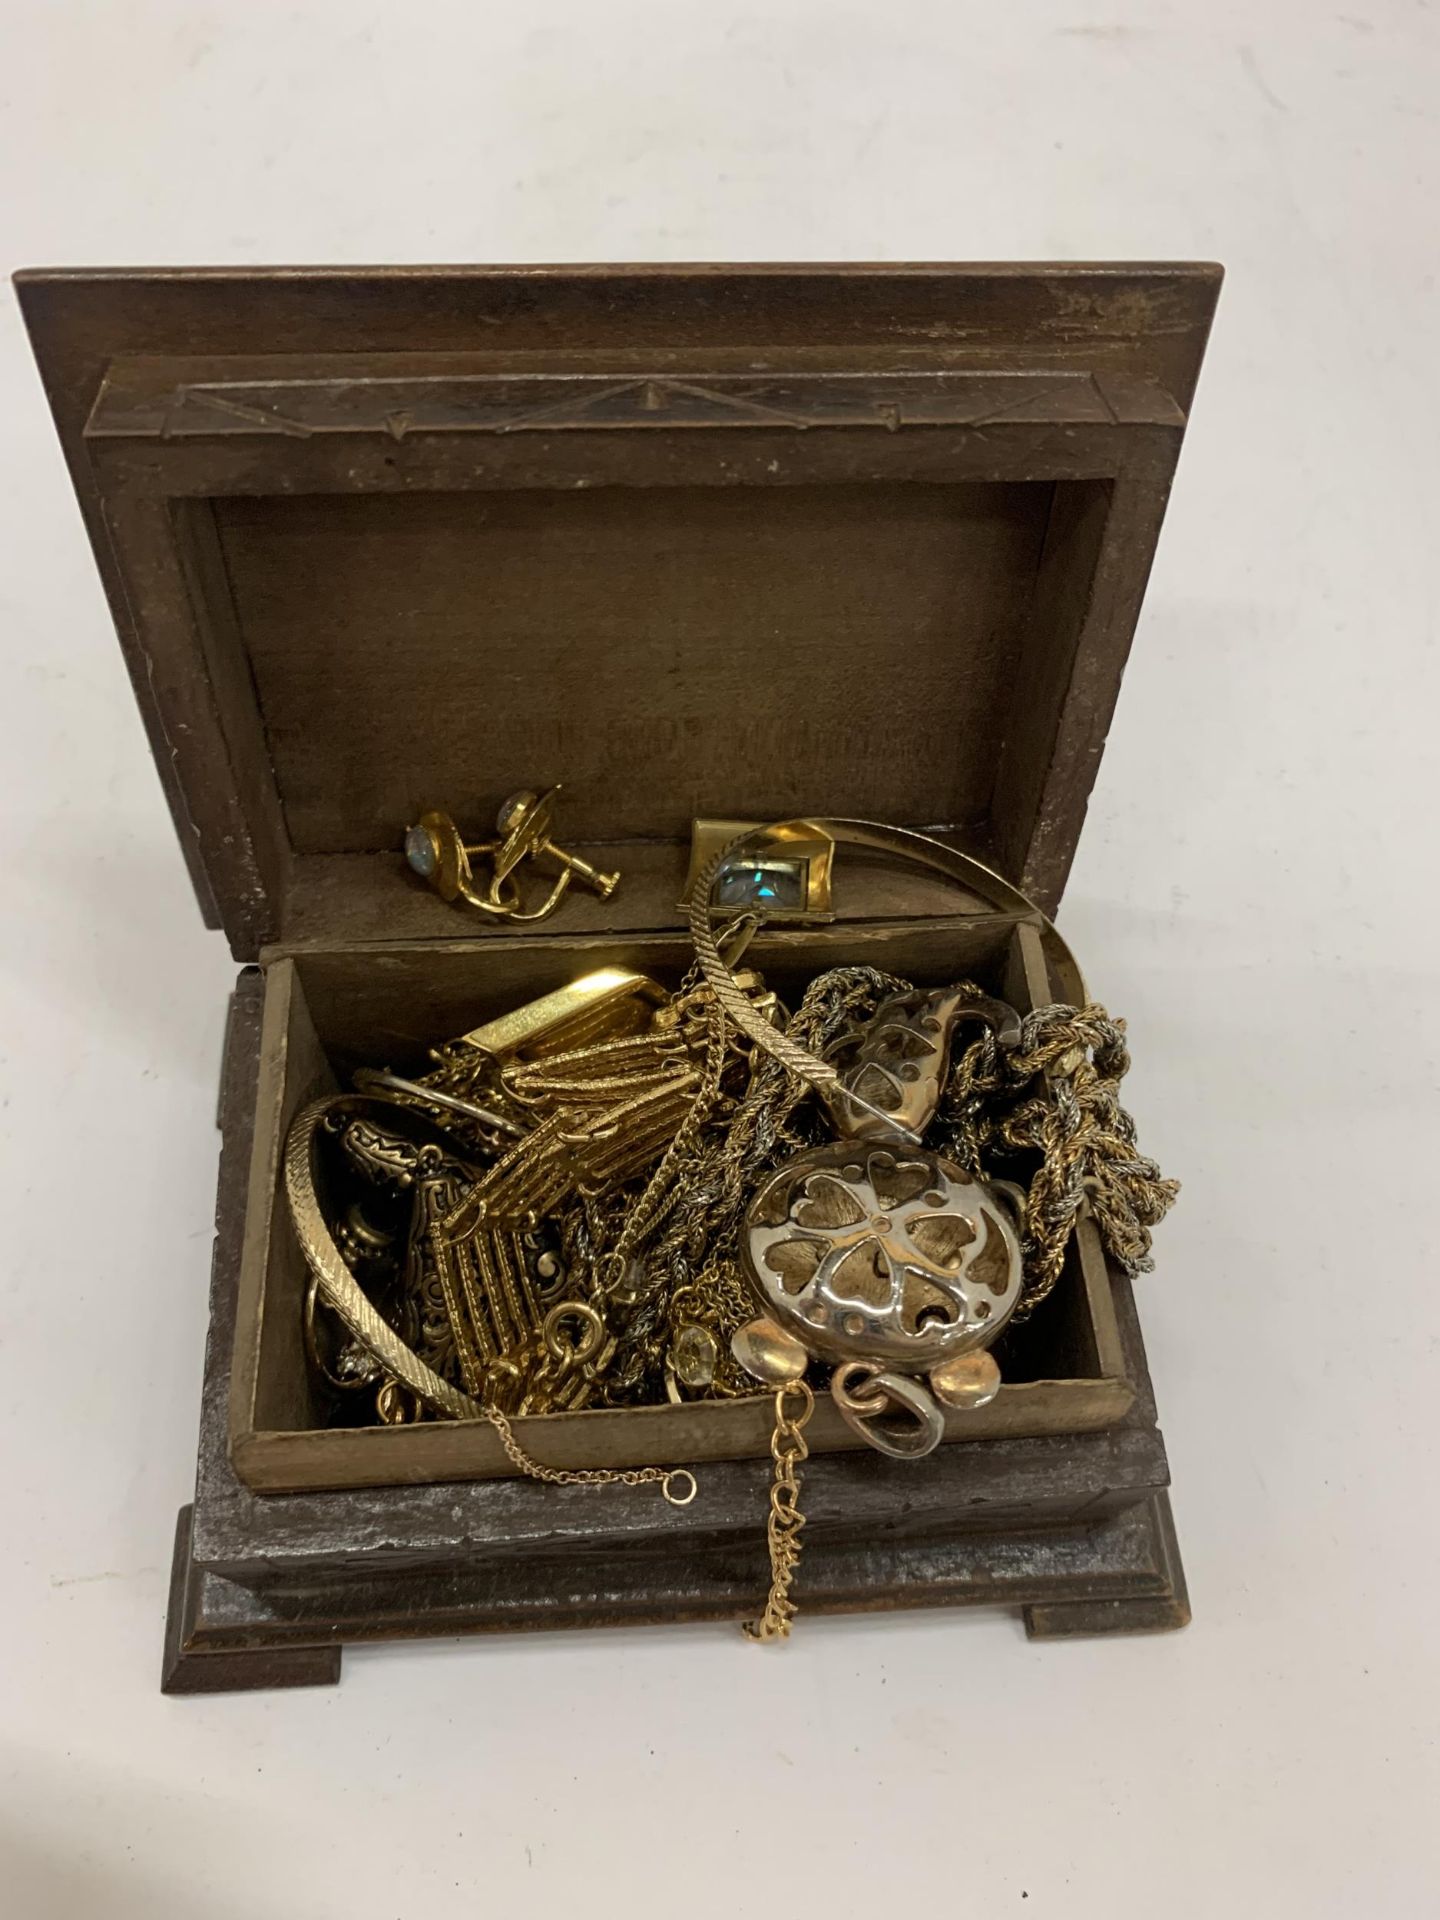 A QUANTITY OF YELLOW METAL COSTUME JEWELLERY TO INCLUDE CHAINS, EARRINGS, ETC IN A WOODEN BOX